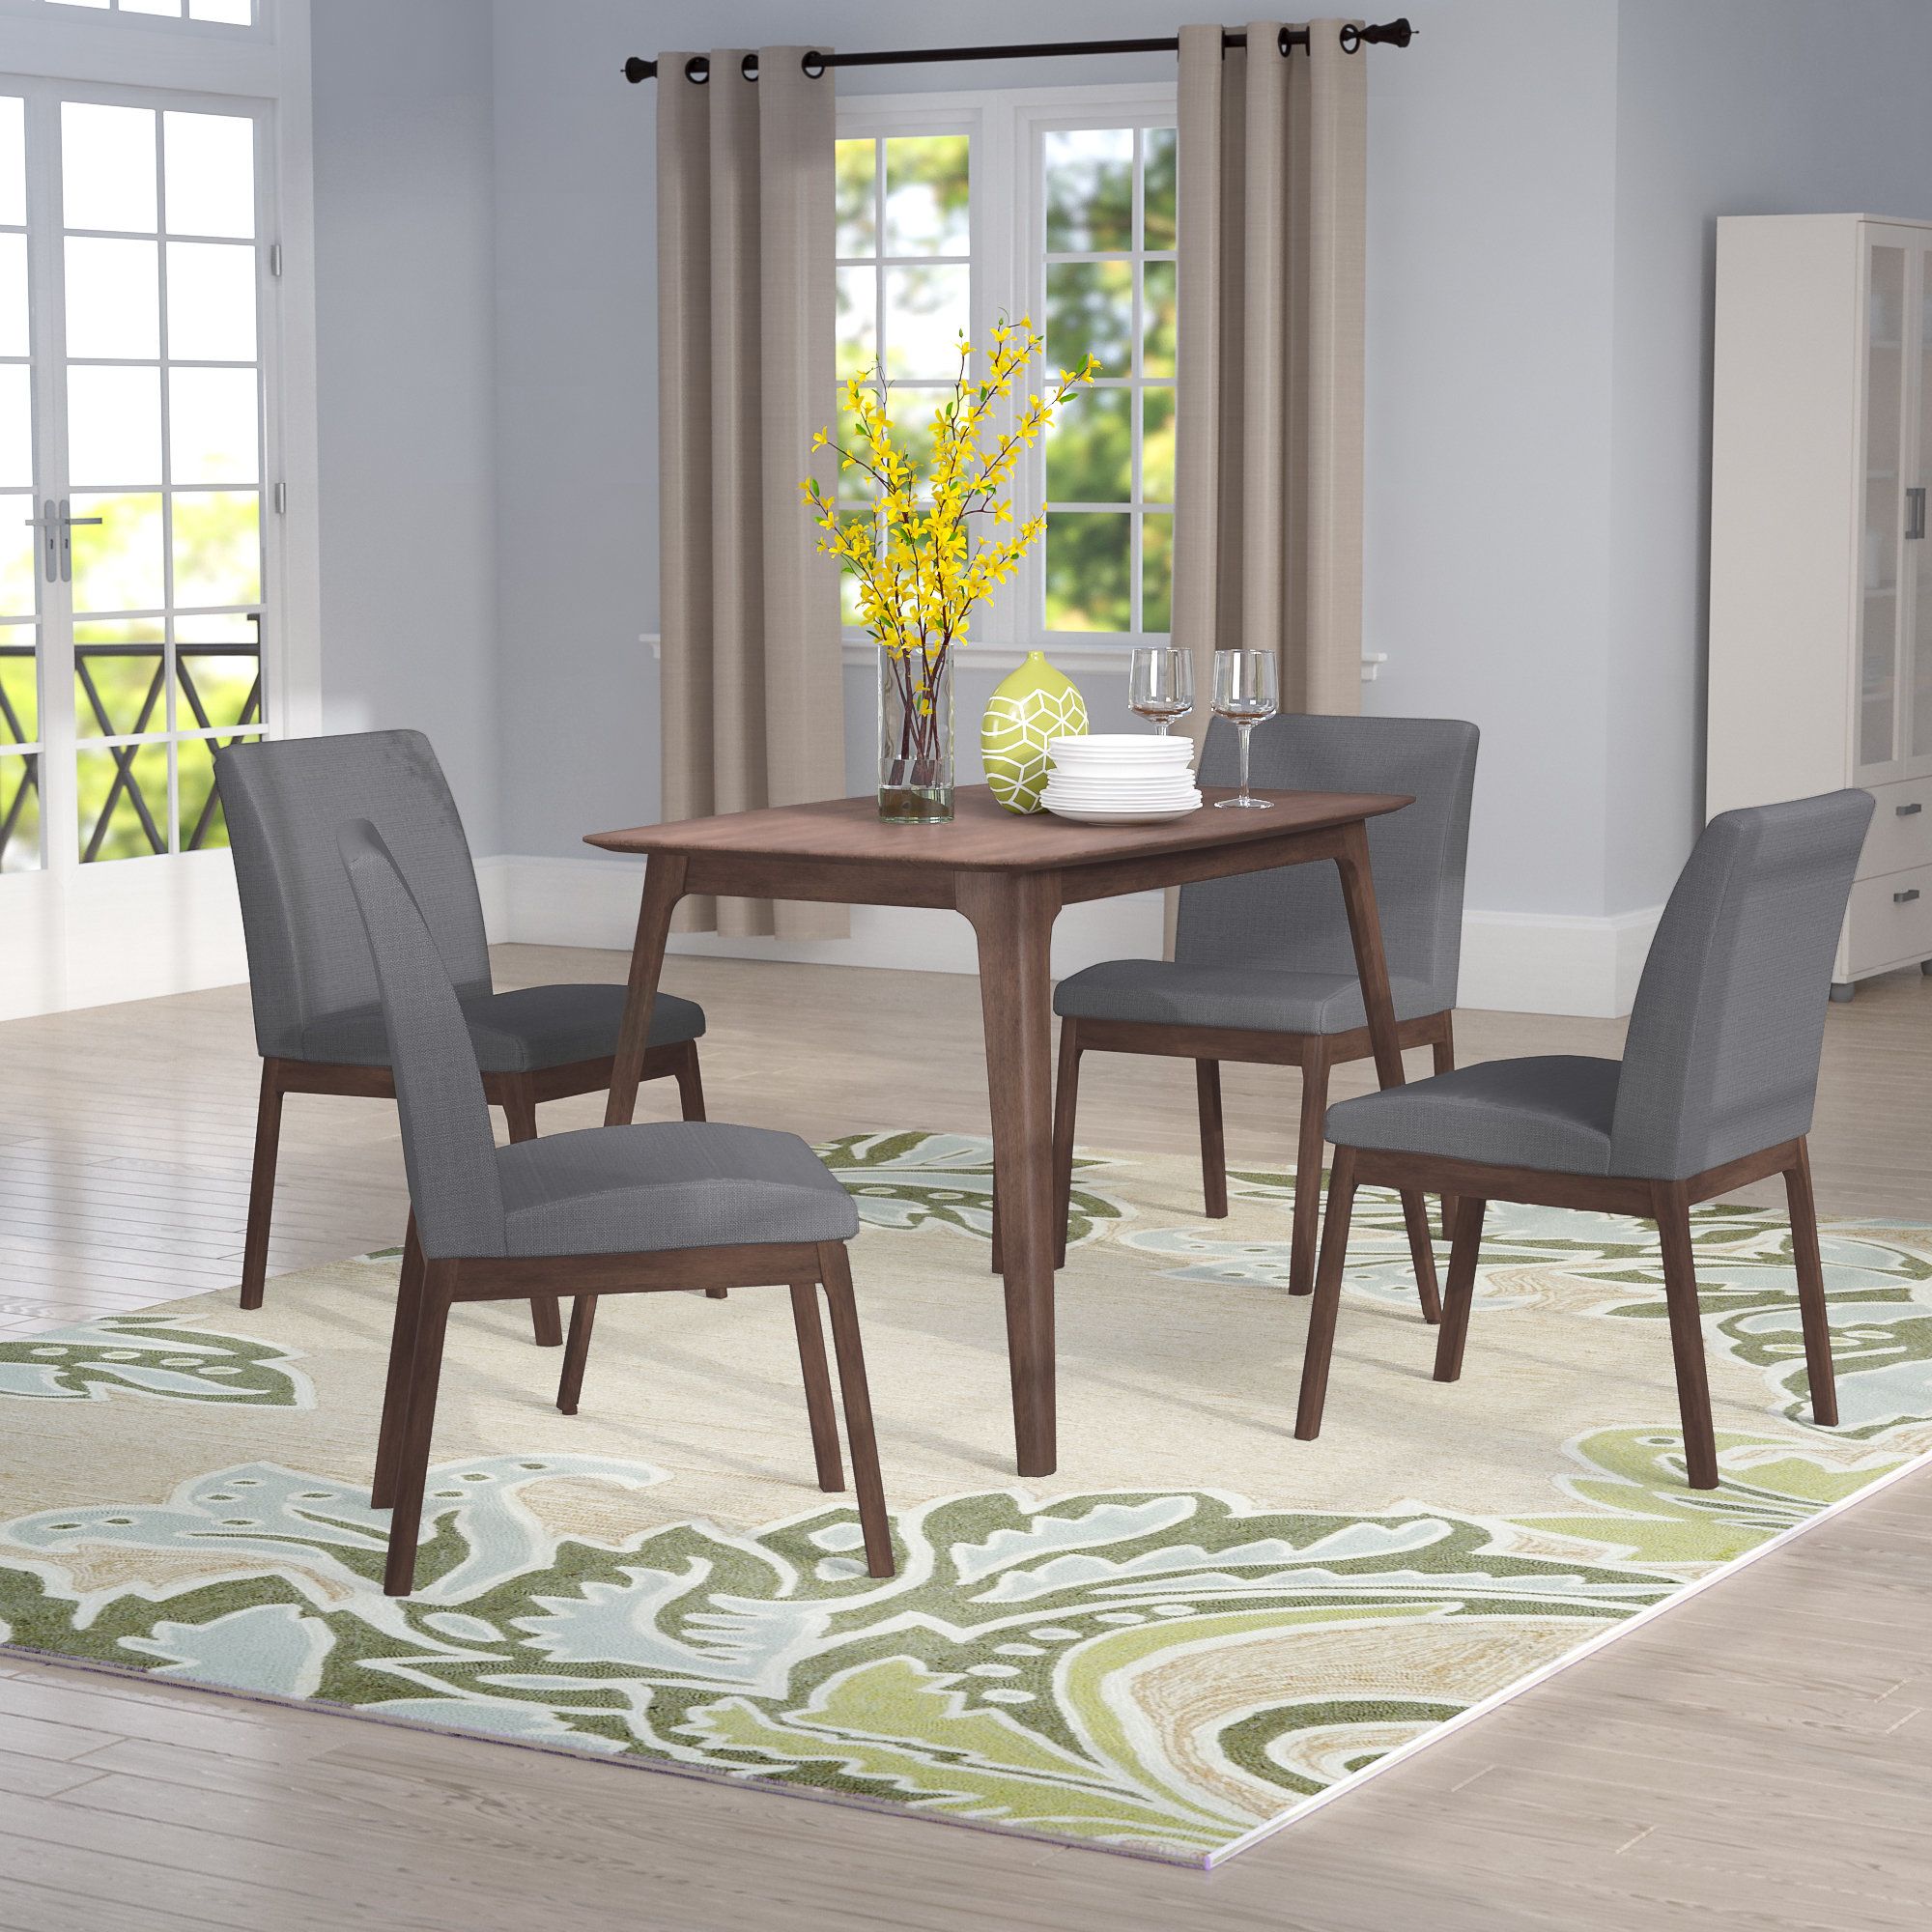 Tunis 5 Piece Dining Set Within Newest Liles 5 Piece Breakfast Nook Dining Sets (View 5 of 20)